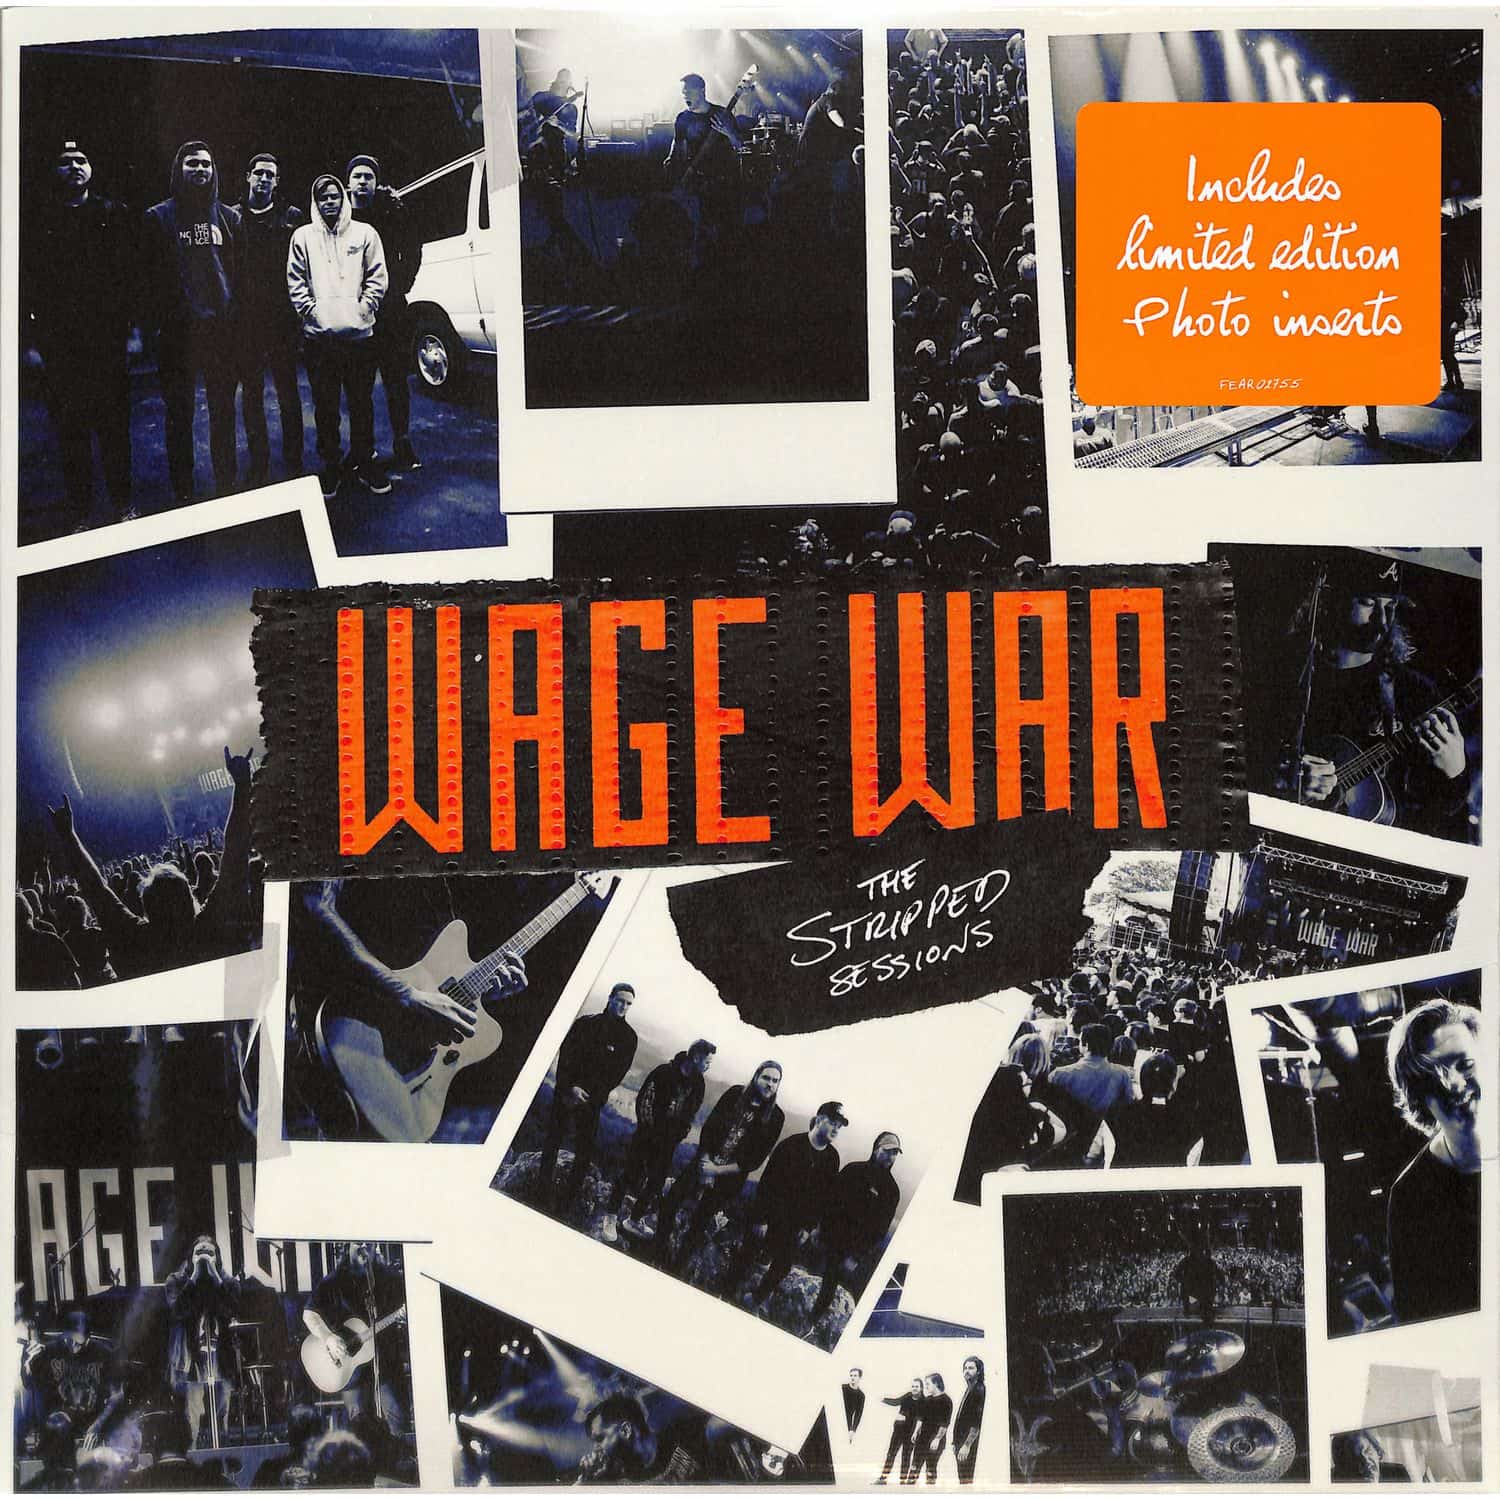 Wage War - THE STRIPPED SESSIONS 